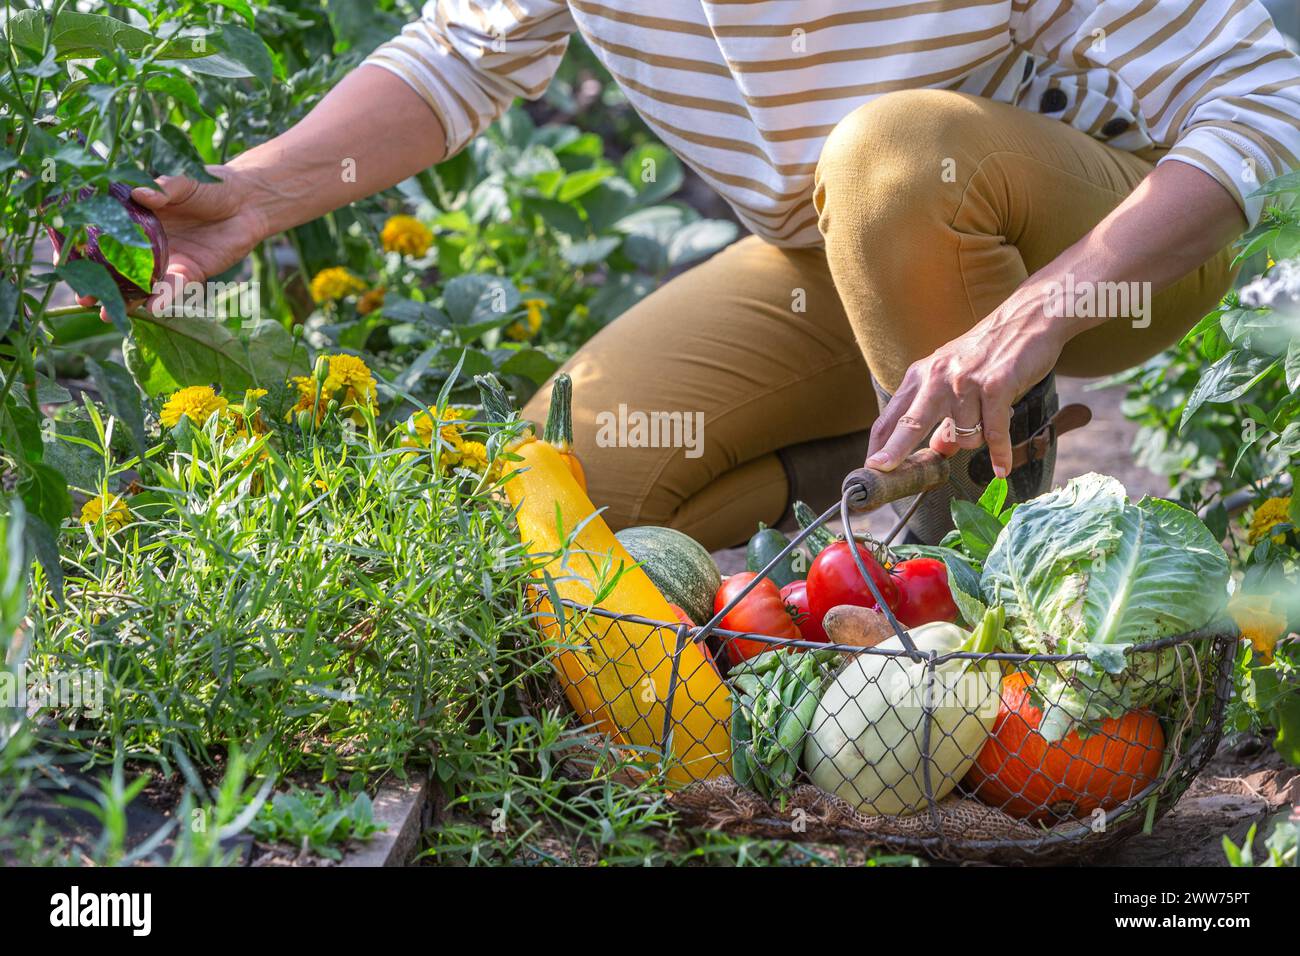 Close-up of hand picking an eggplant. Stock Photo